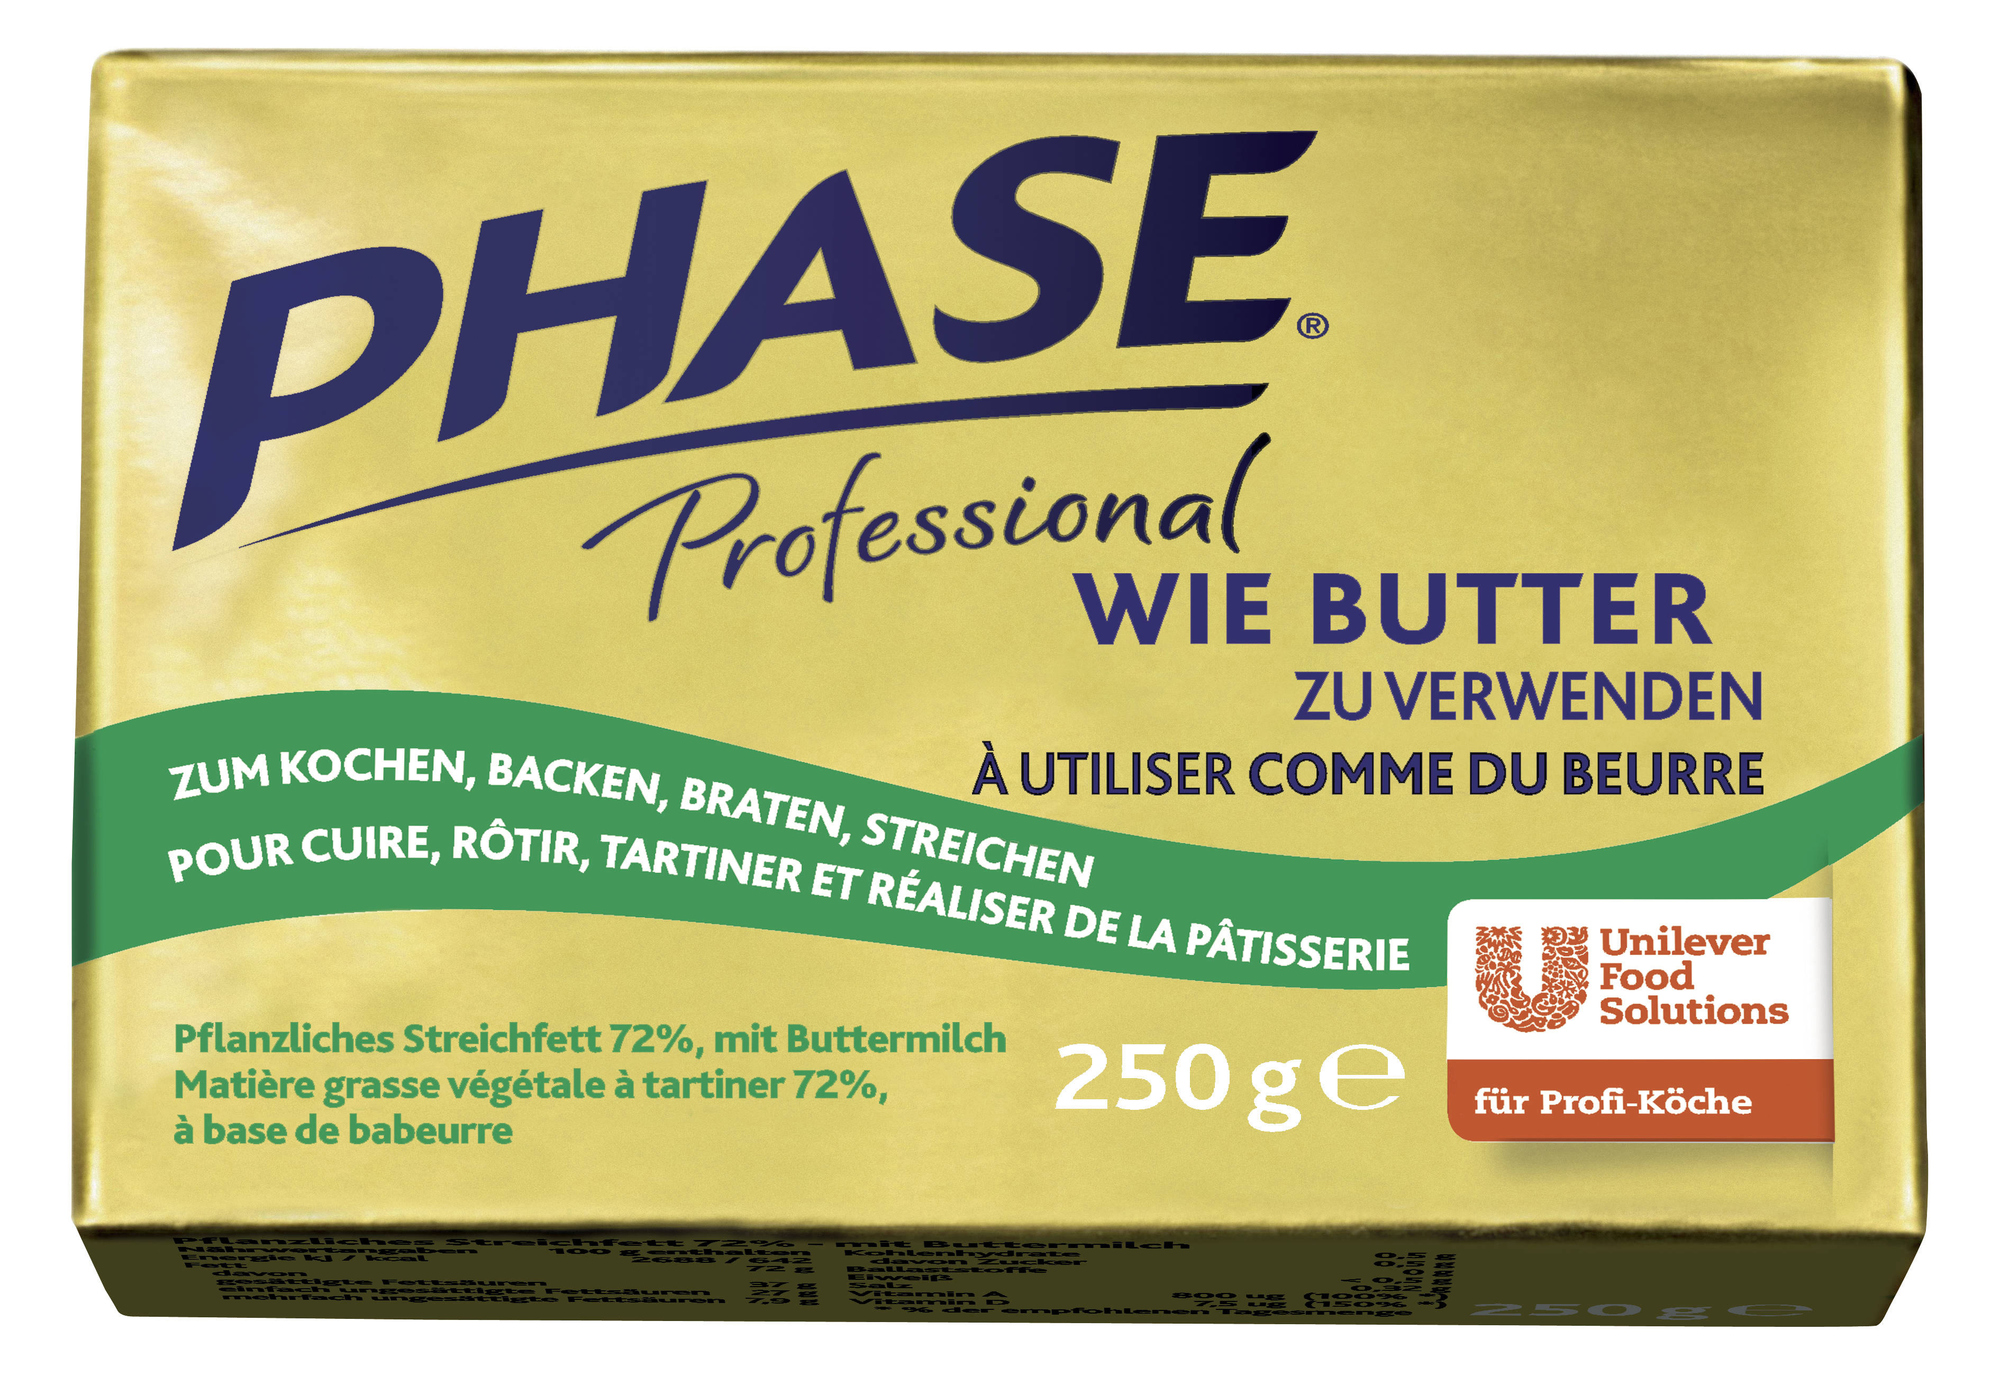 Phase Professional wie Butter 250g